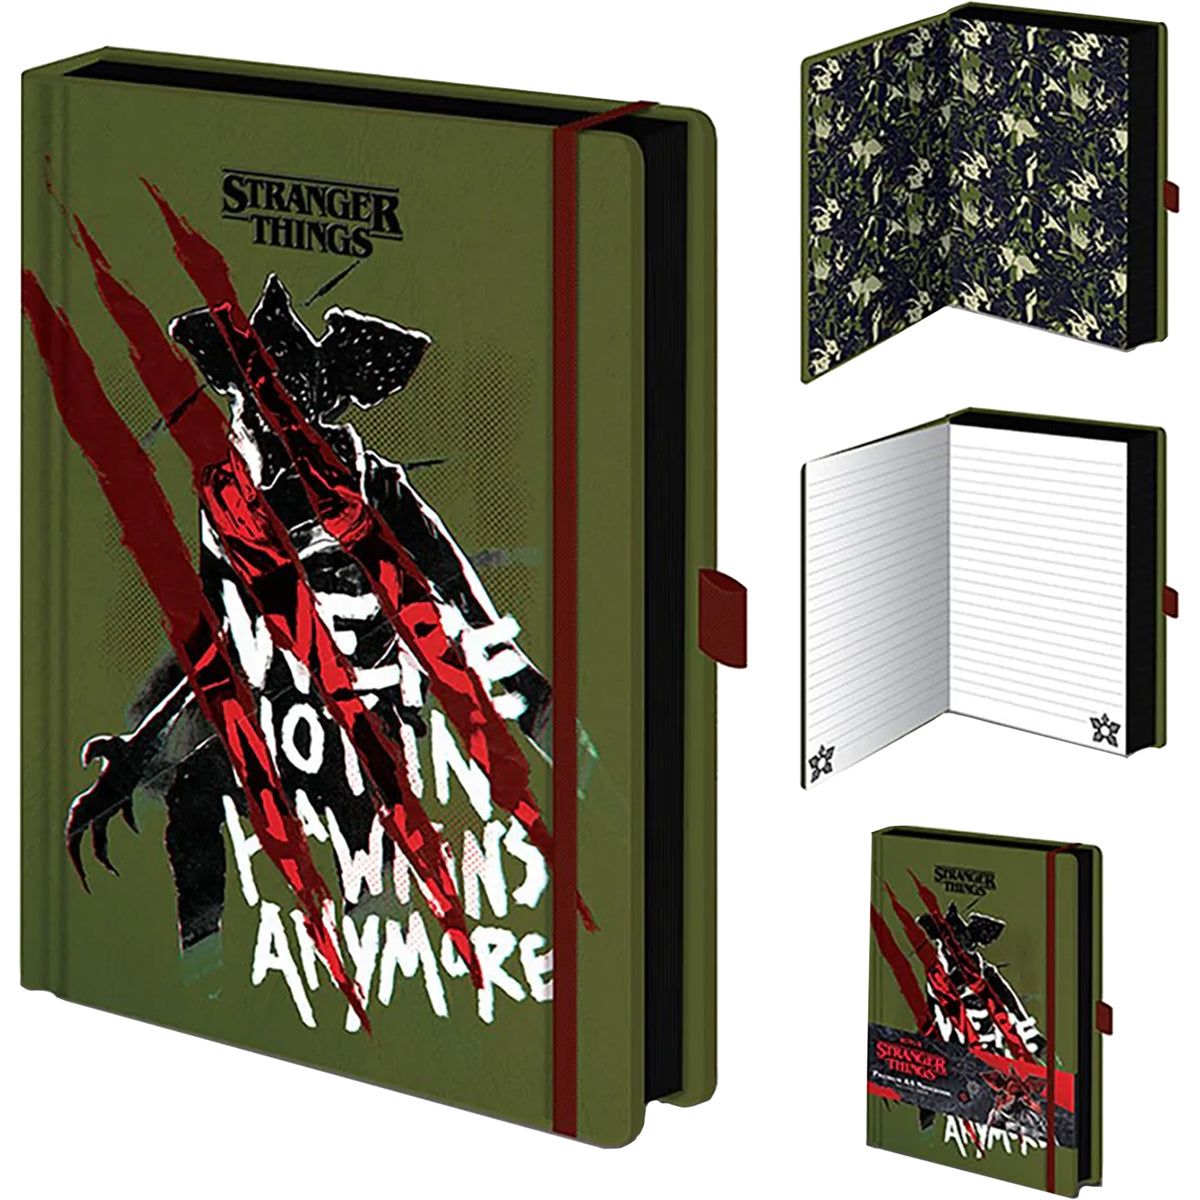 STRANGER THINGS 4 NOT IN HAWKINS - Premium A5 Notebook Olive